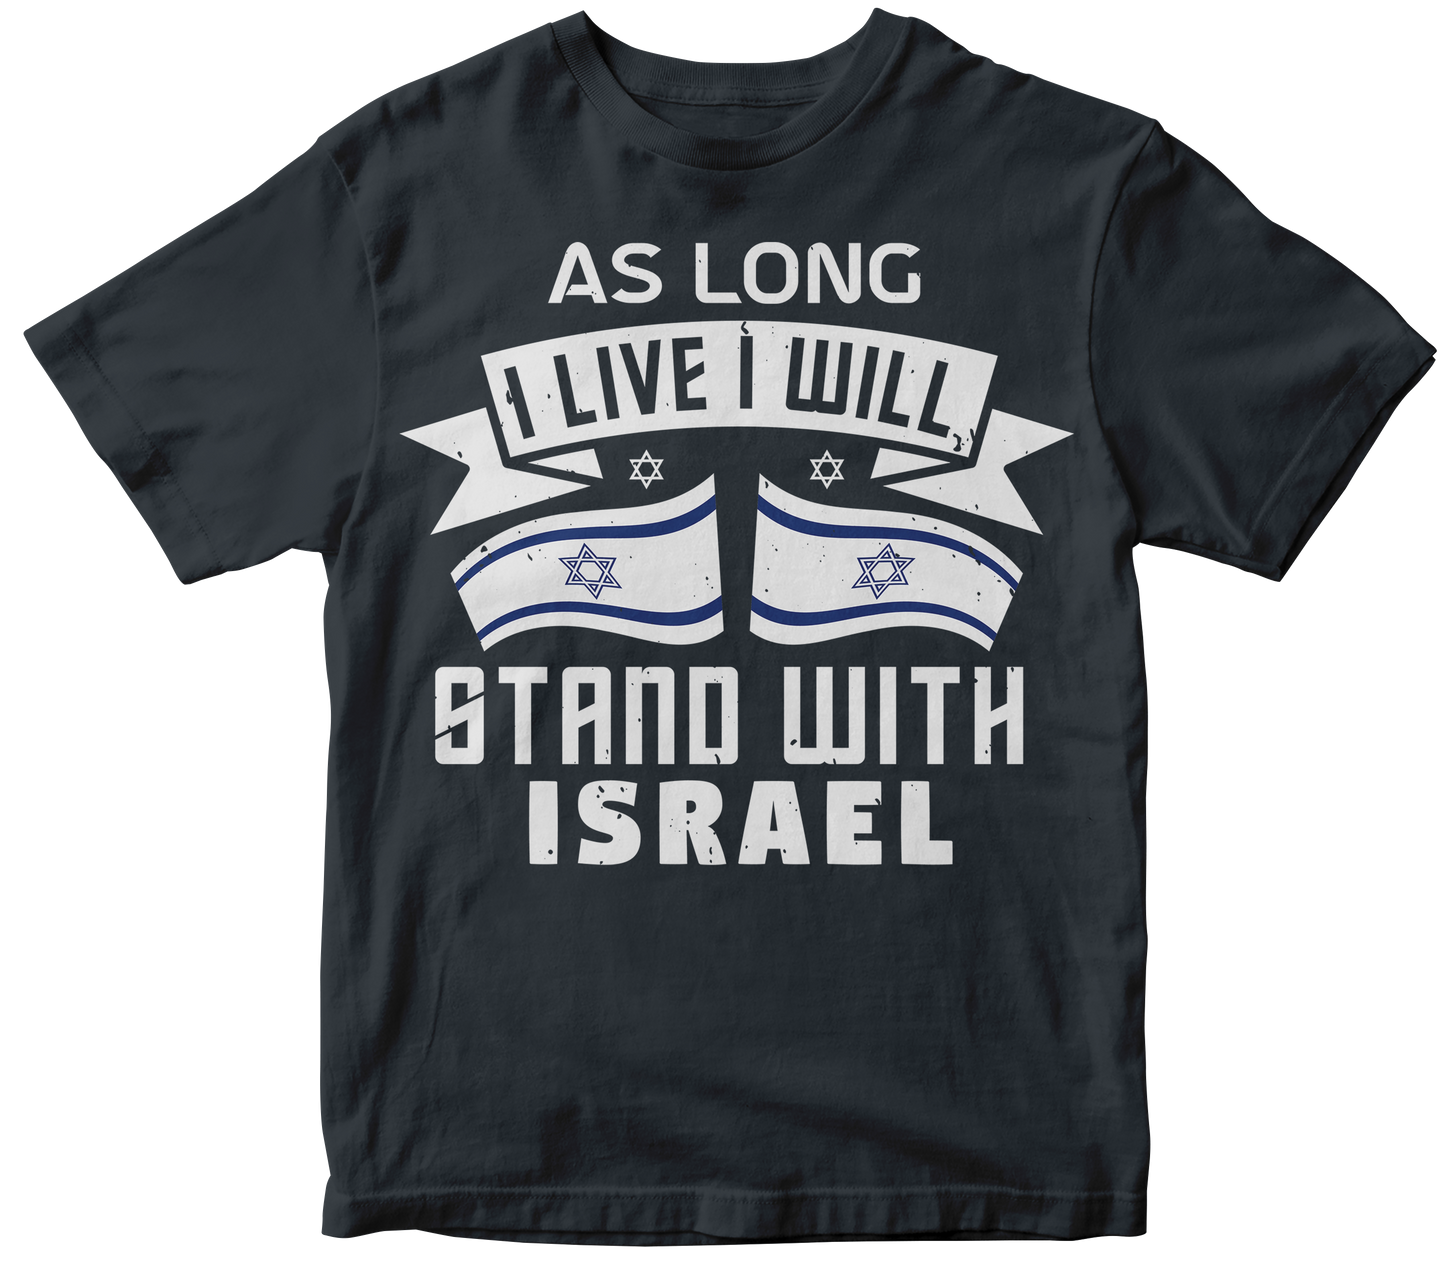 As long i live i will Stand with Israel